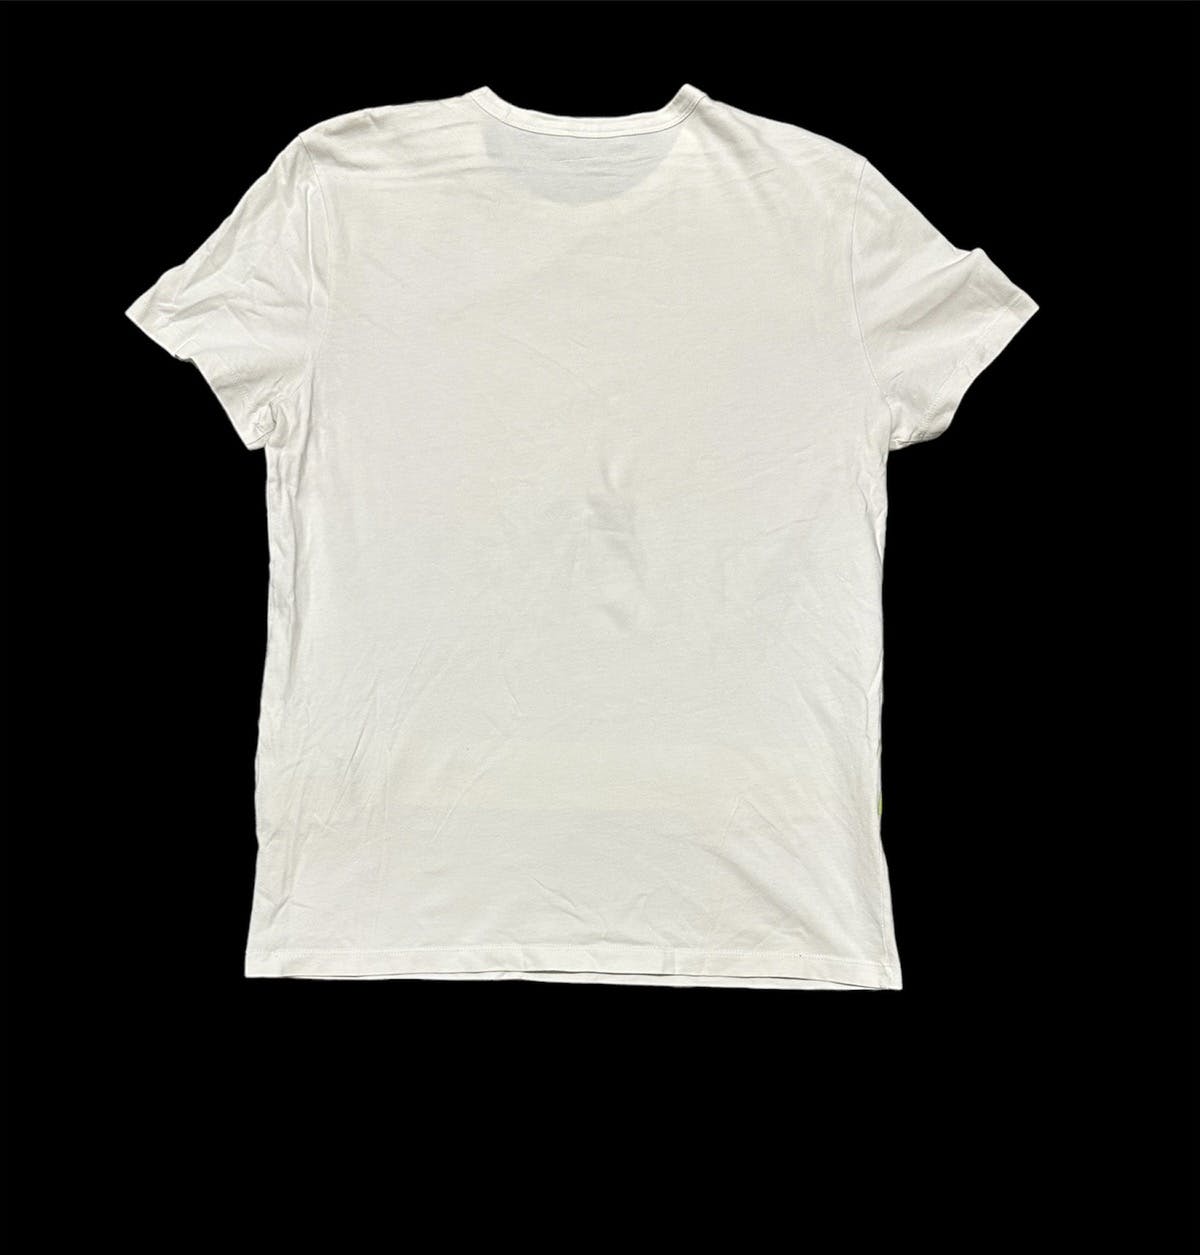 Moncler spellout tee - 2